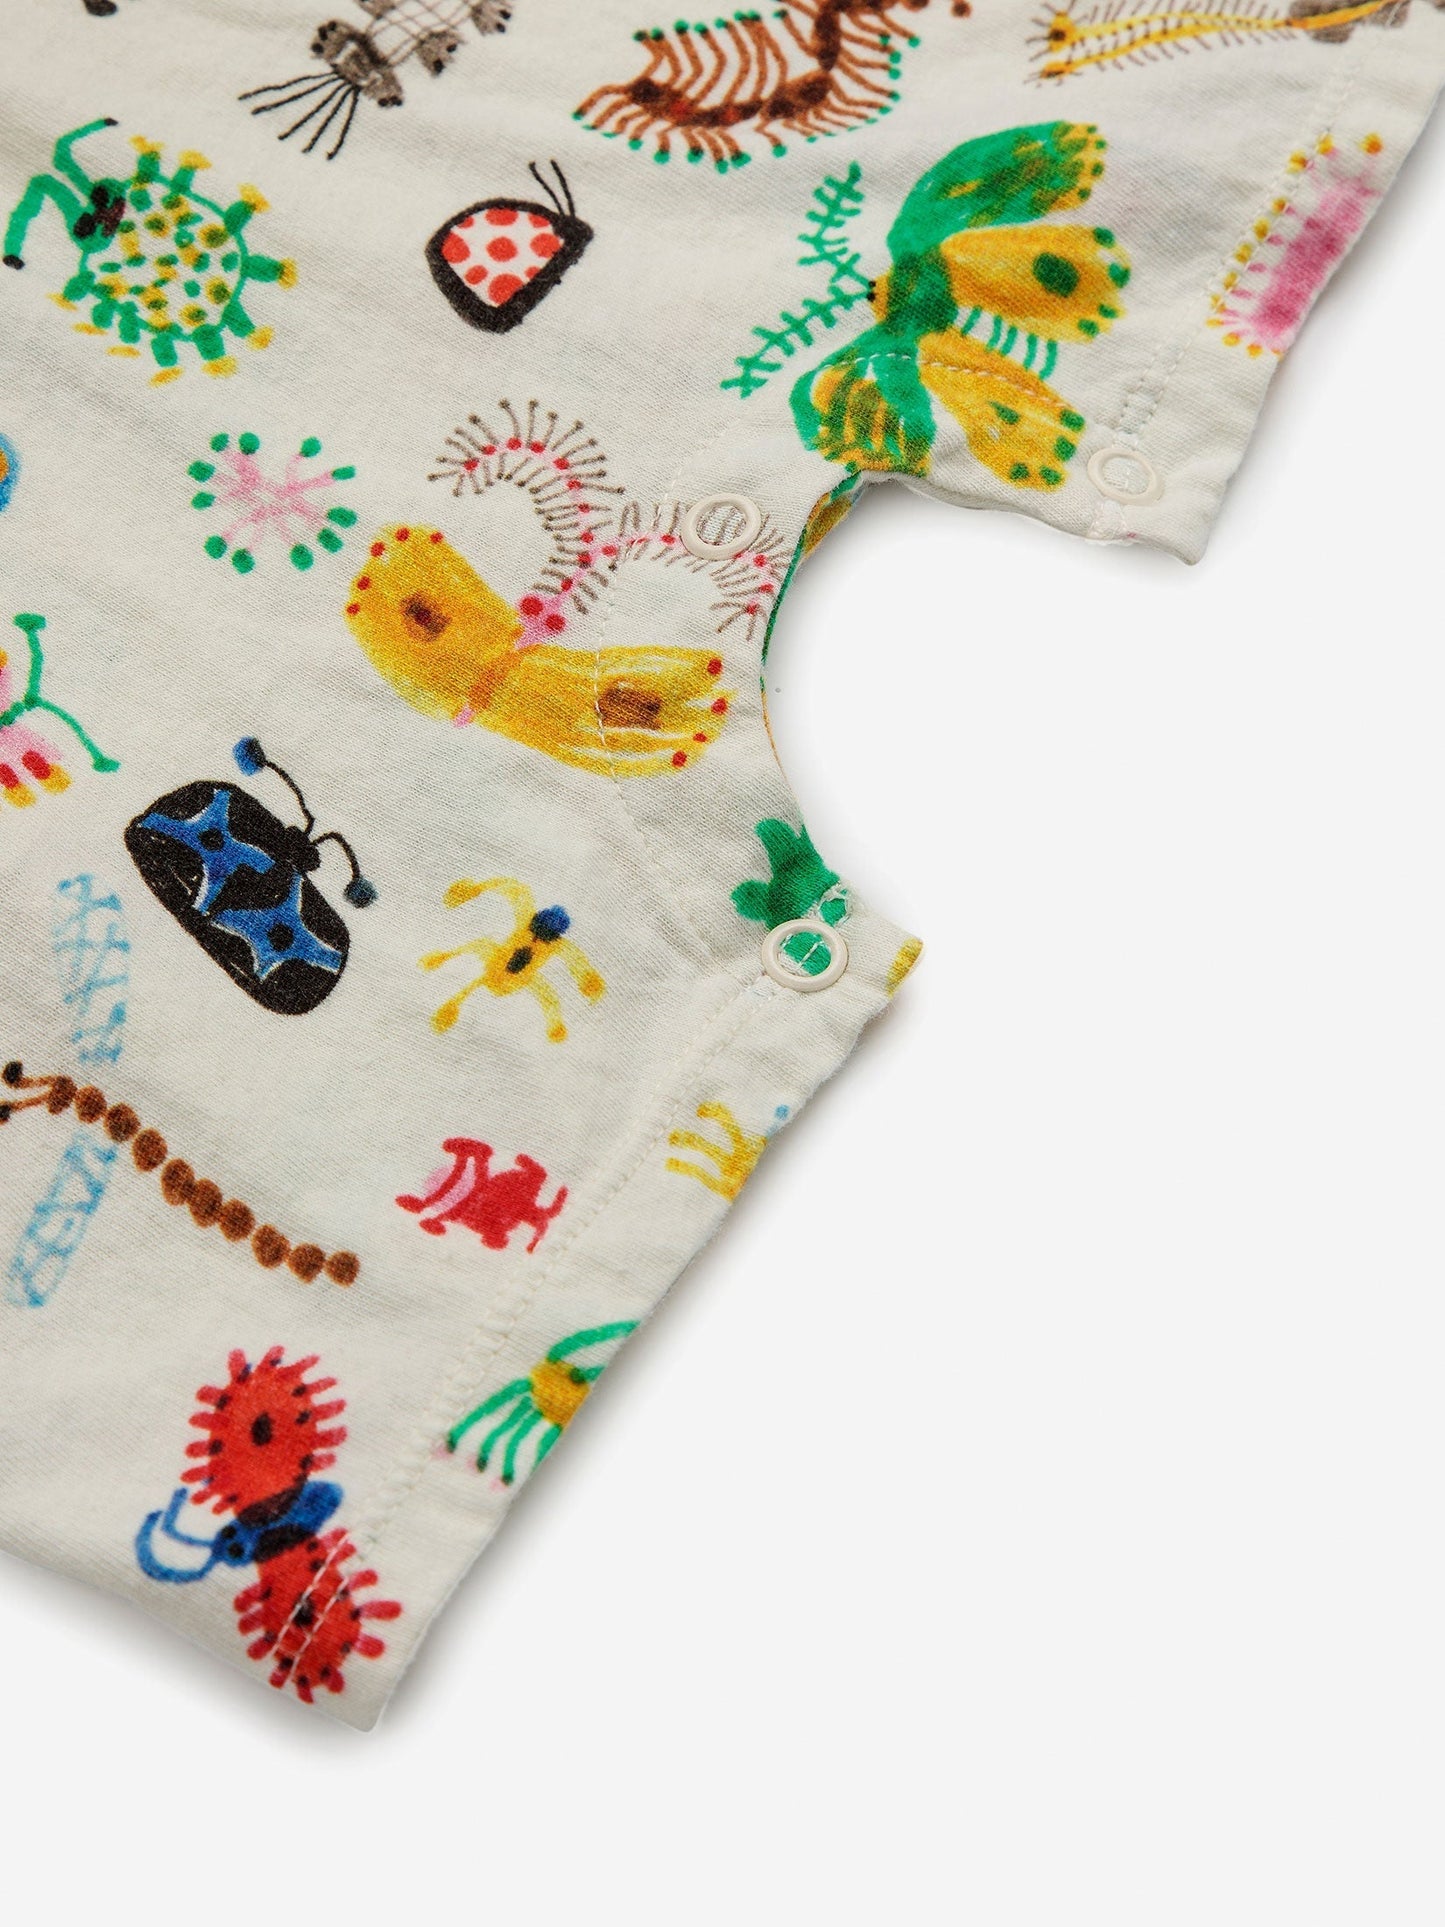 Baby Fuuny Insects all over Playsuits